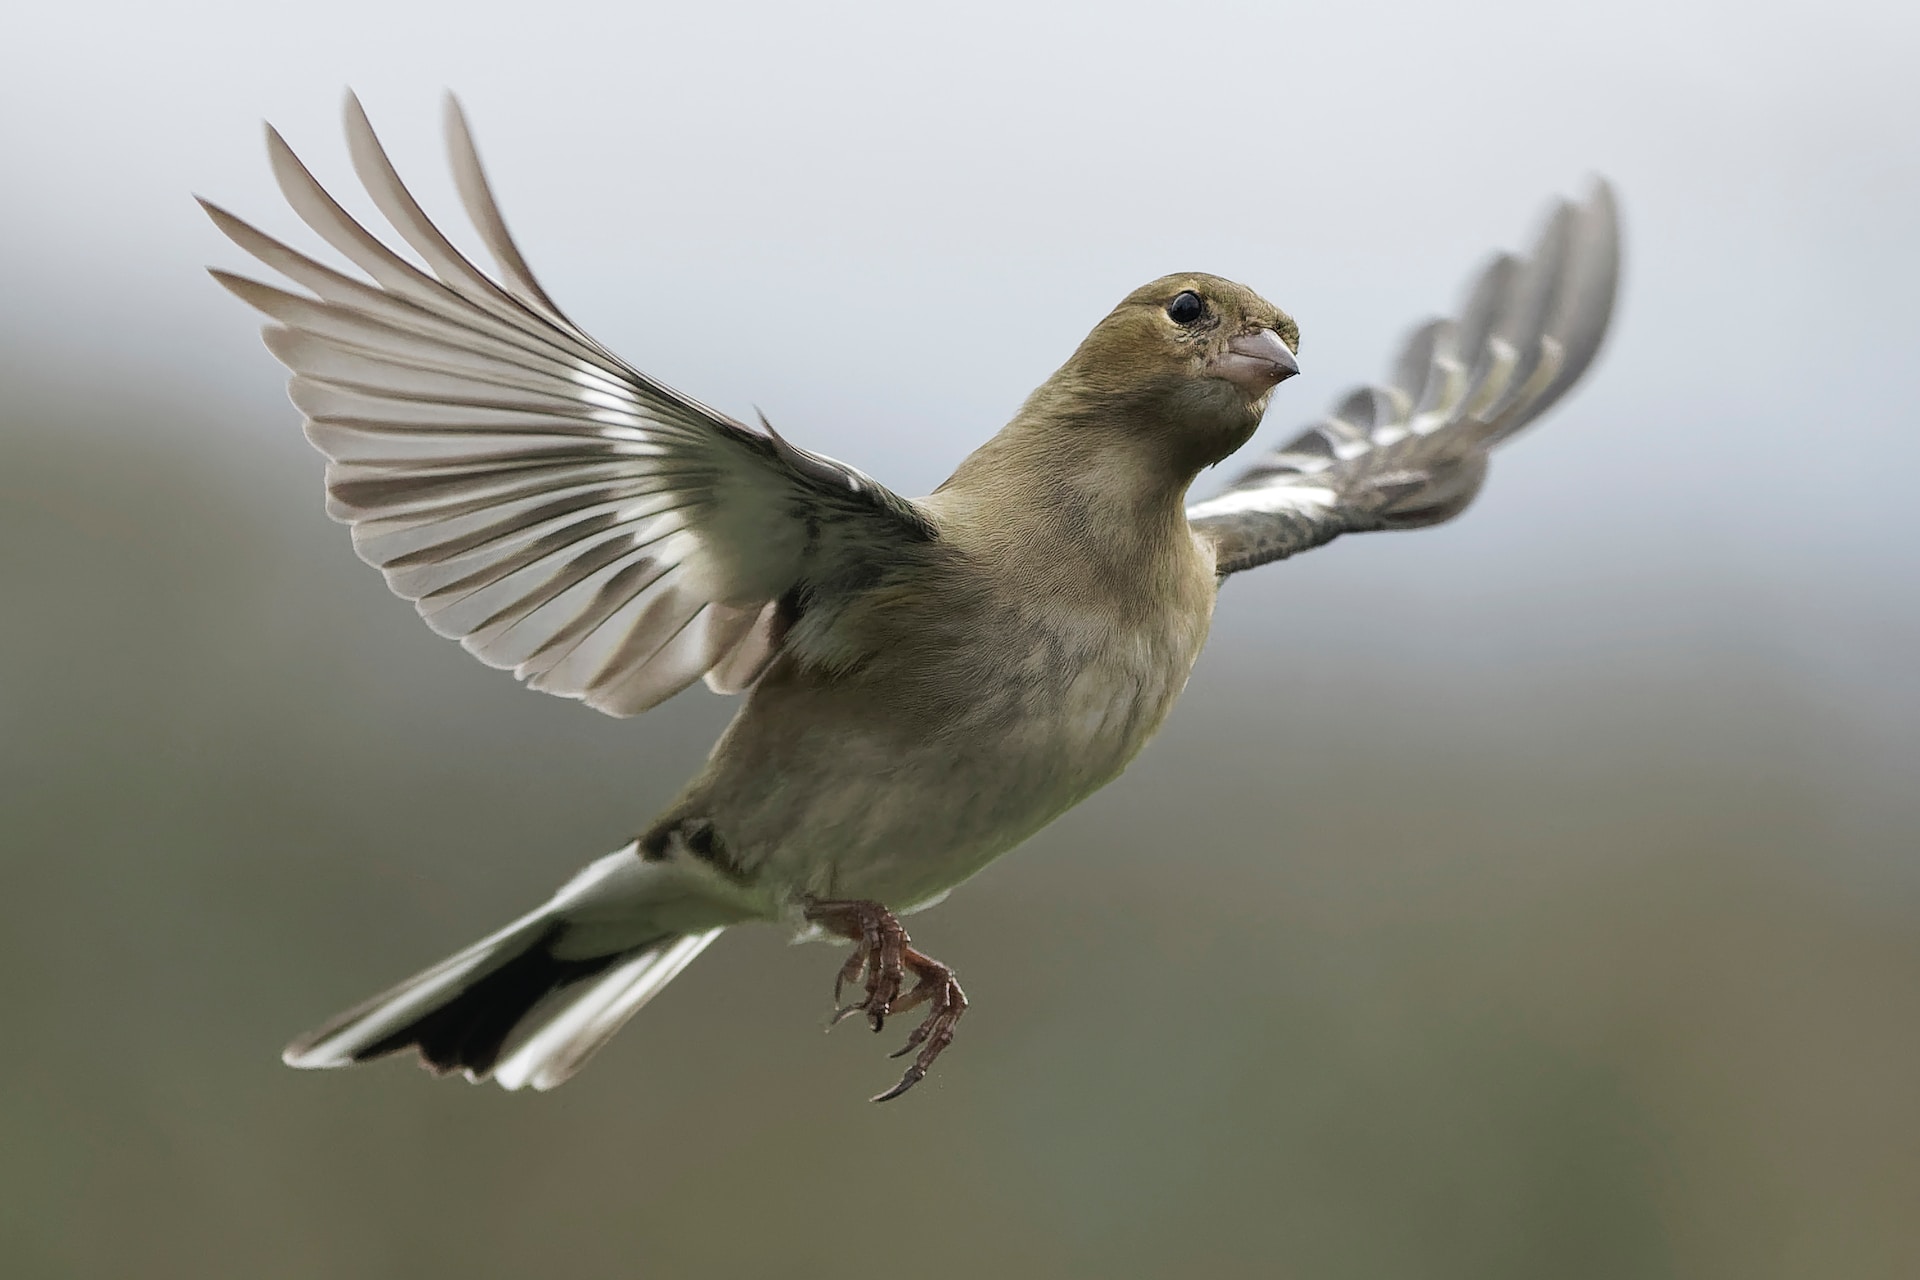 How to Prevent Birds From Flying Into Windows